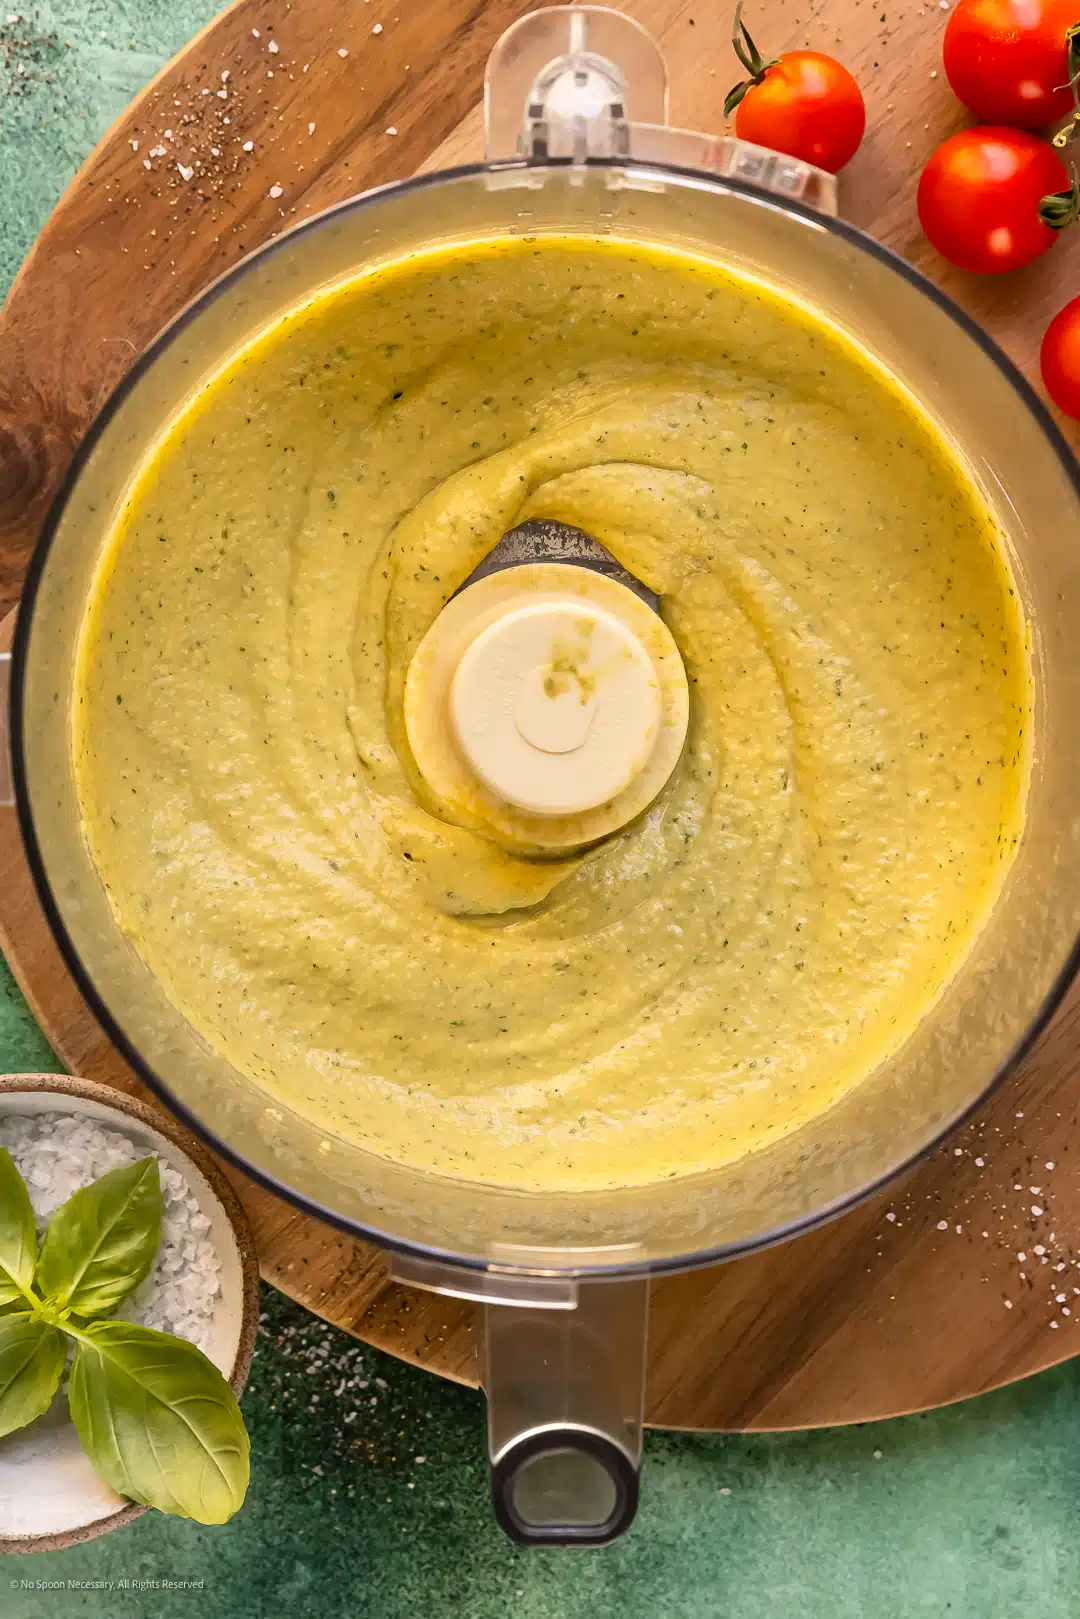 Overhead photo of a creamy green dip in the bowl of a food processor with a bowl fresh basil leaves off to the side.